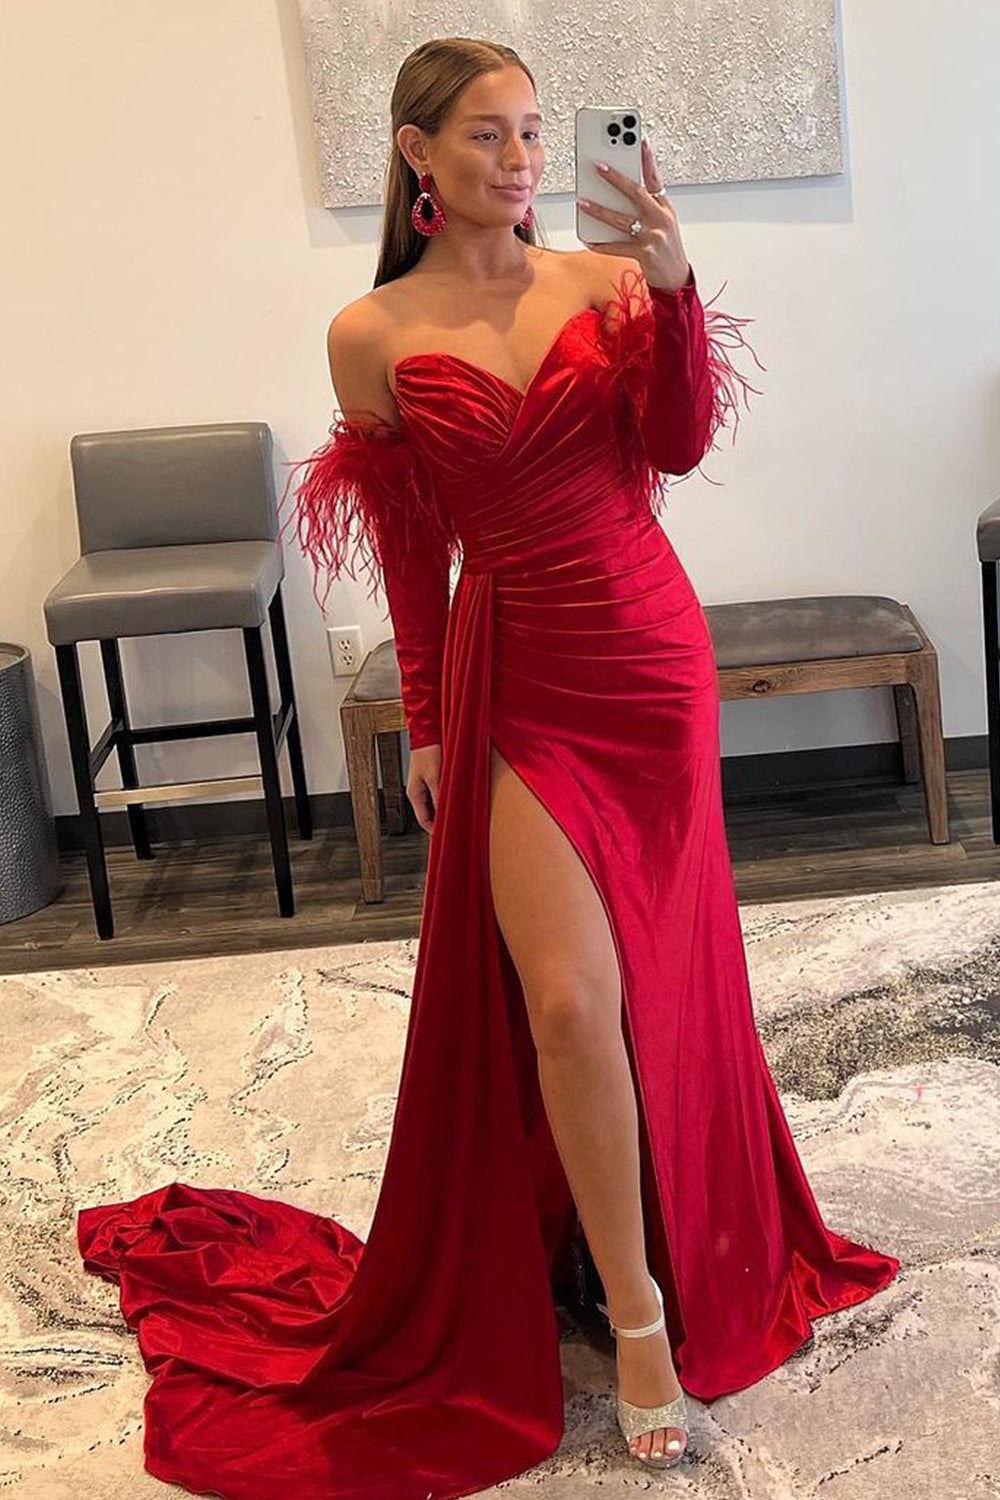 dressimeMermaid Sweetheart Pleated Long Sleeves Prom Dresses with Slit Feather 